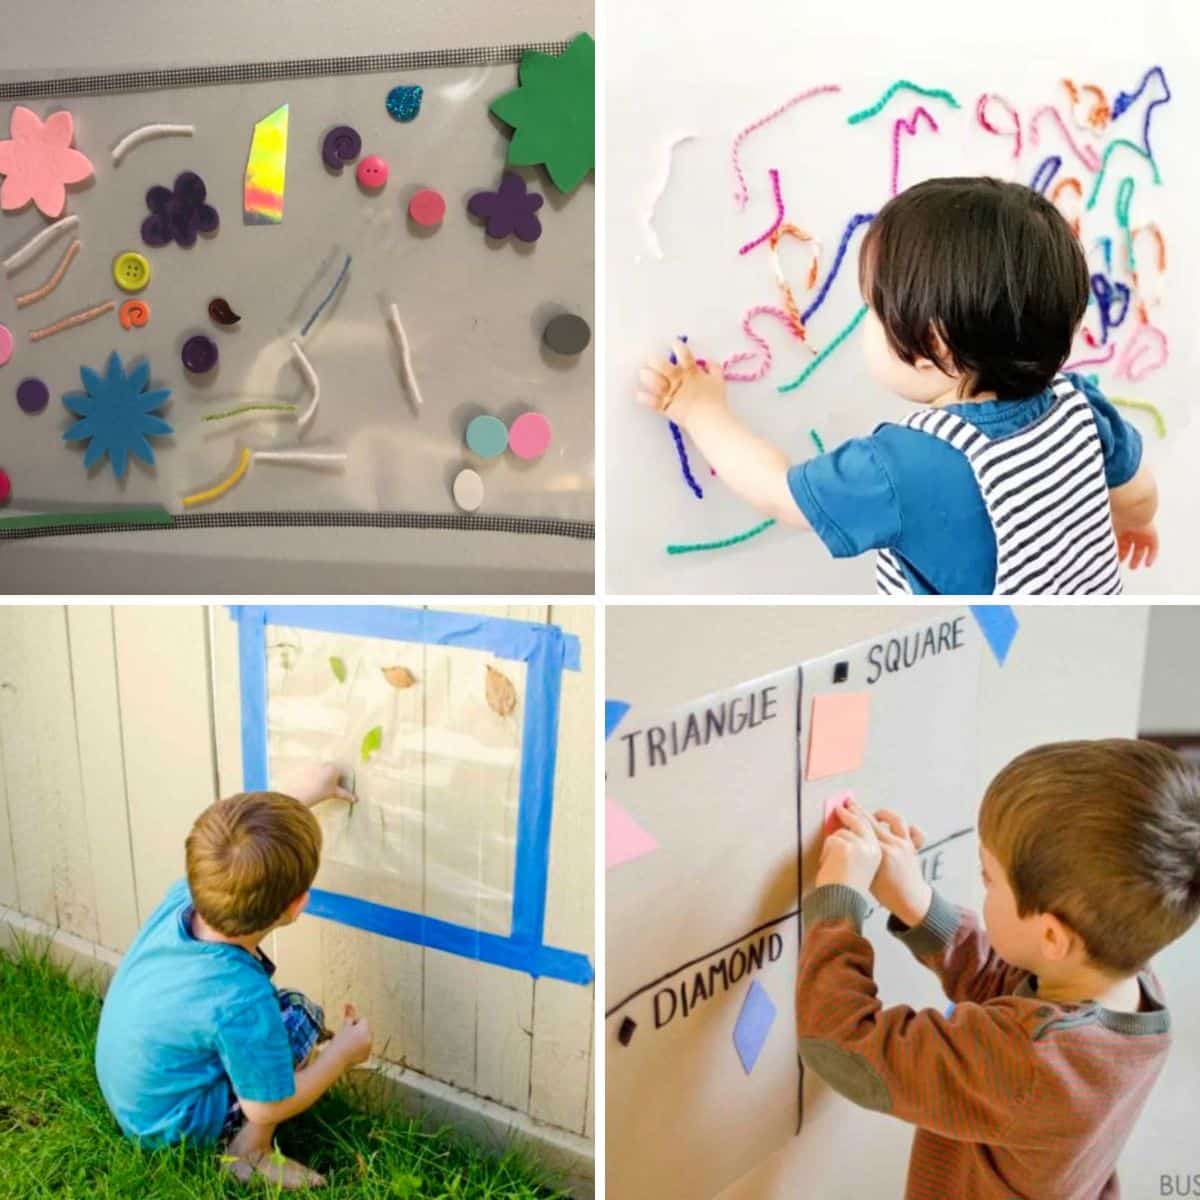 4 images of sticky wall activities for kids.